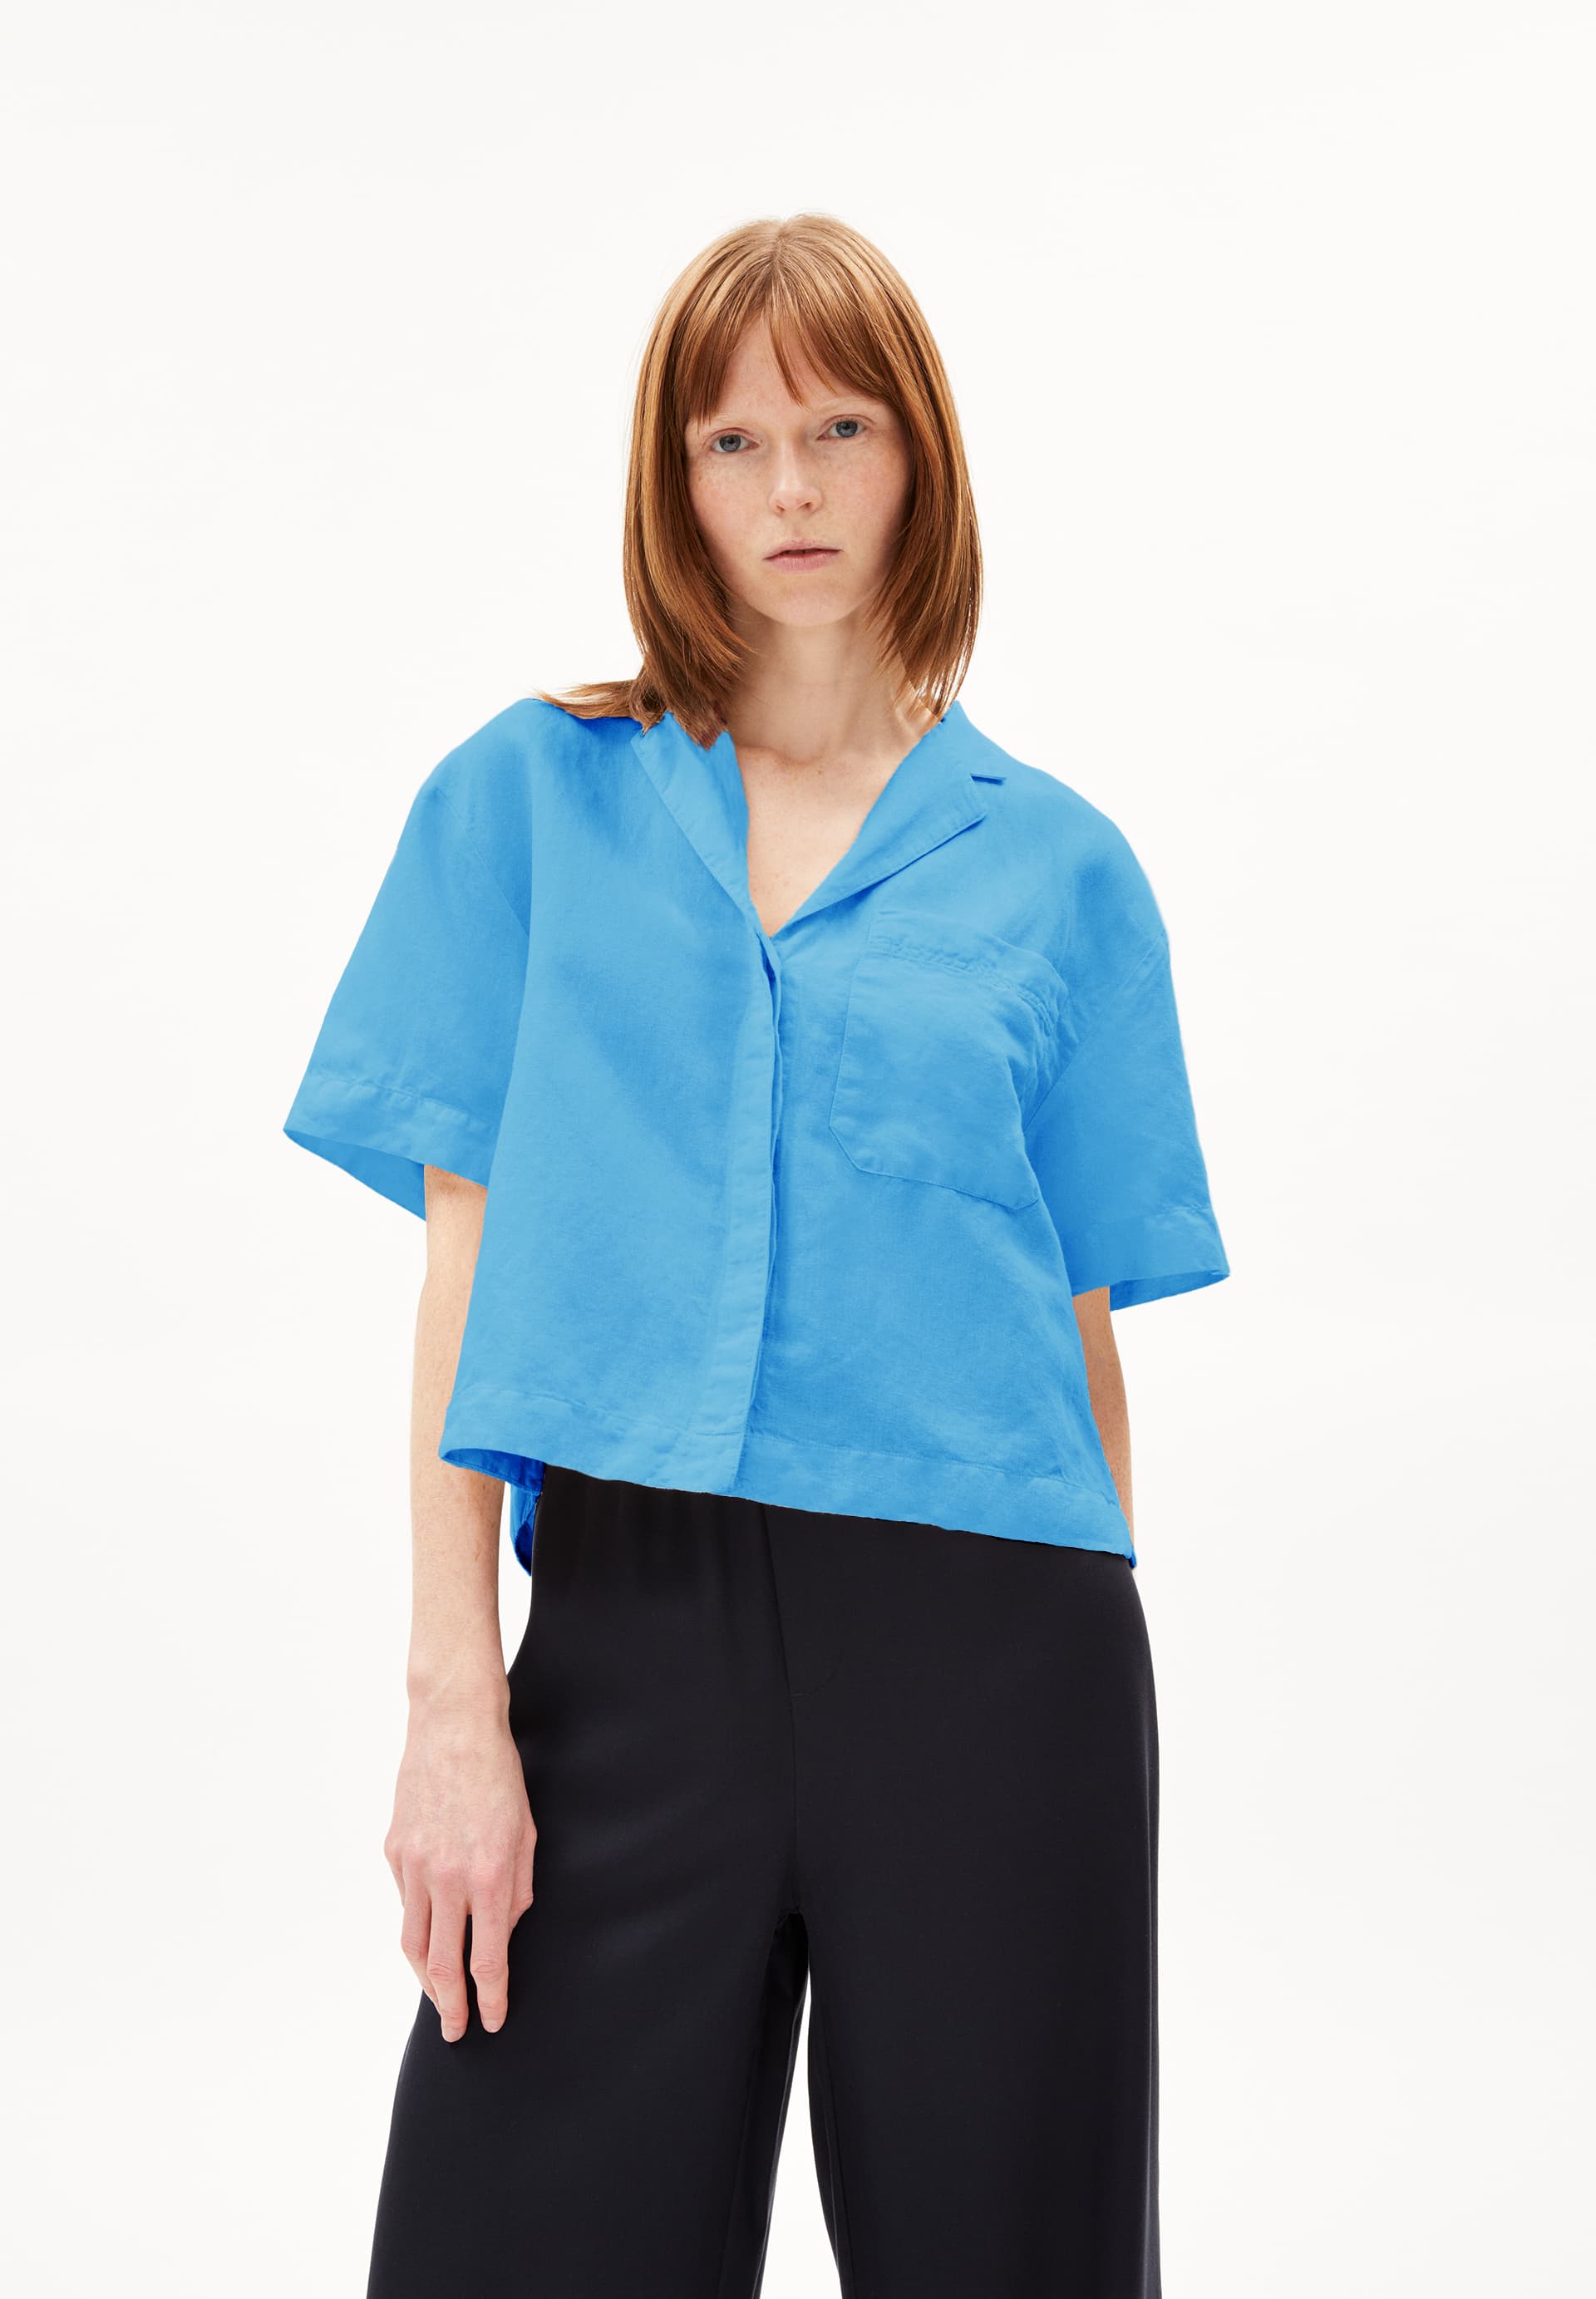 LEAANNE LINO Blouse Loose Fit made of Linen Mix